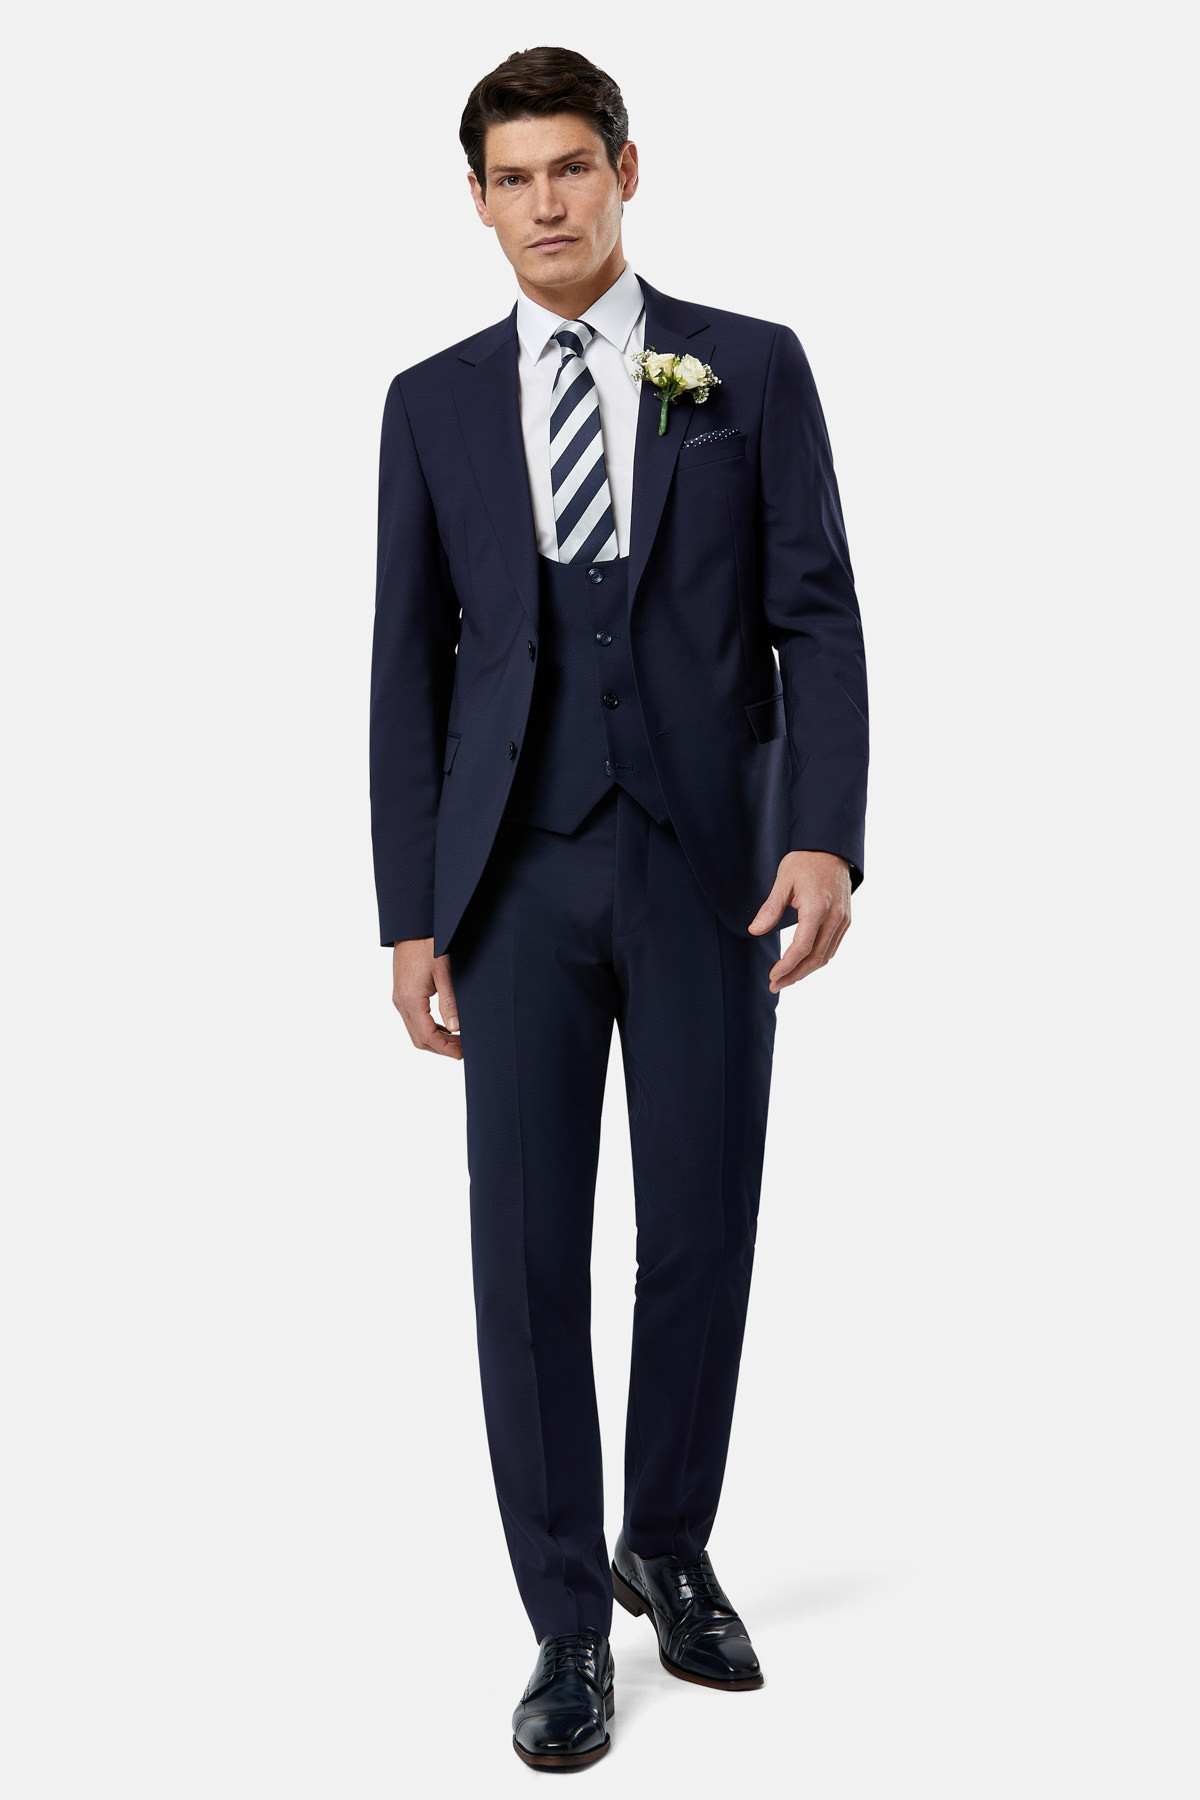 Peter Ink 3 Piece Suit - Tom Murphy's Formal and Menswear